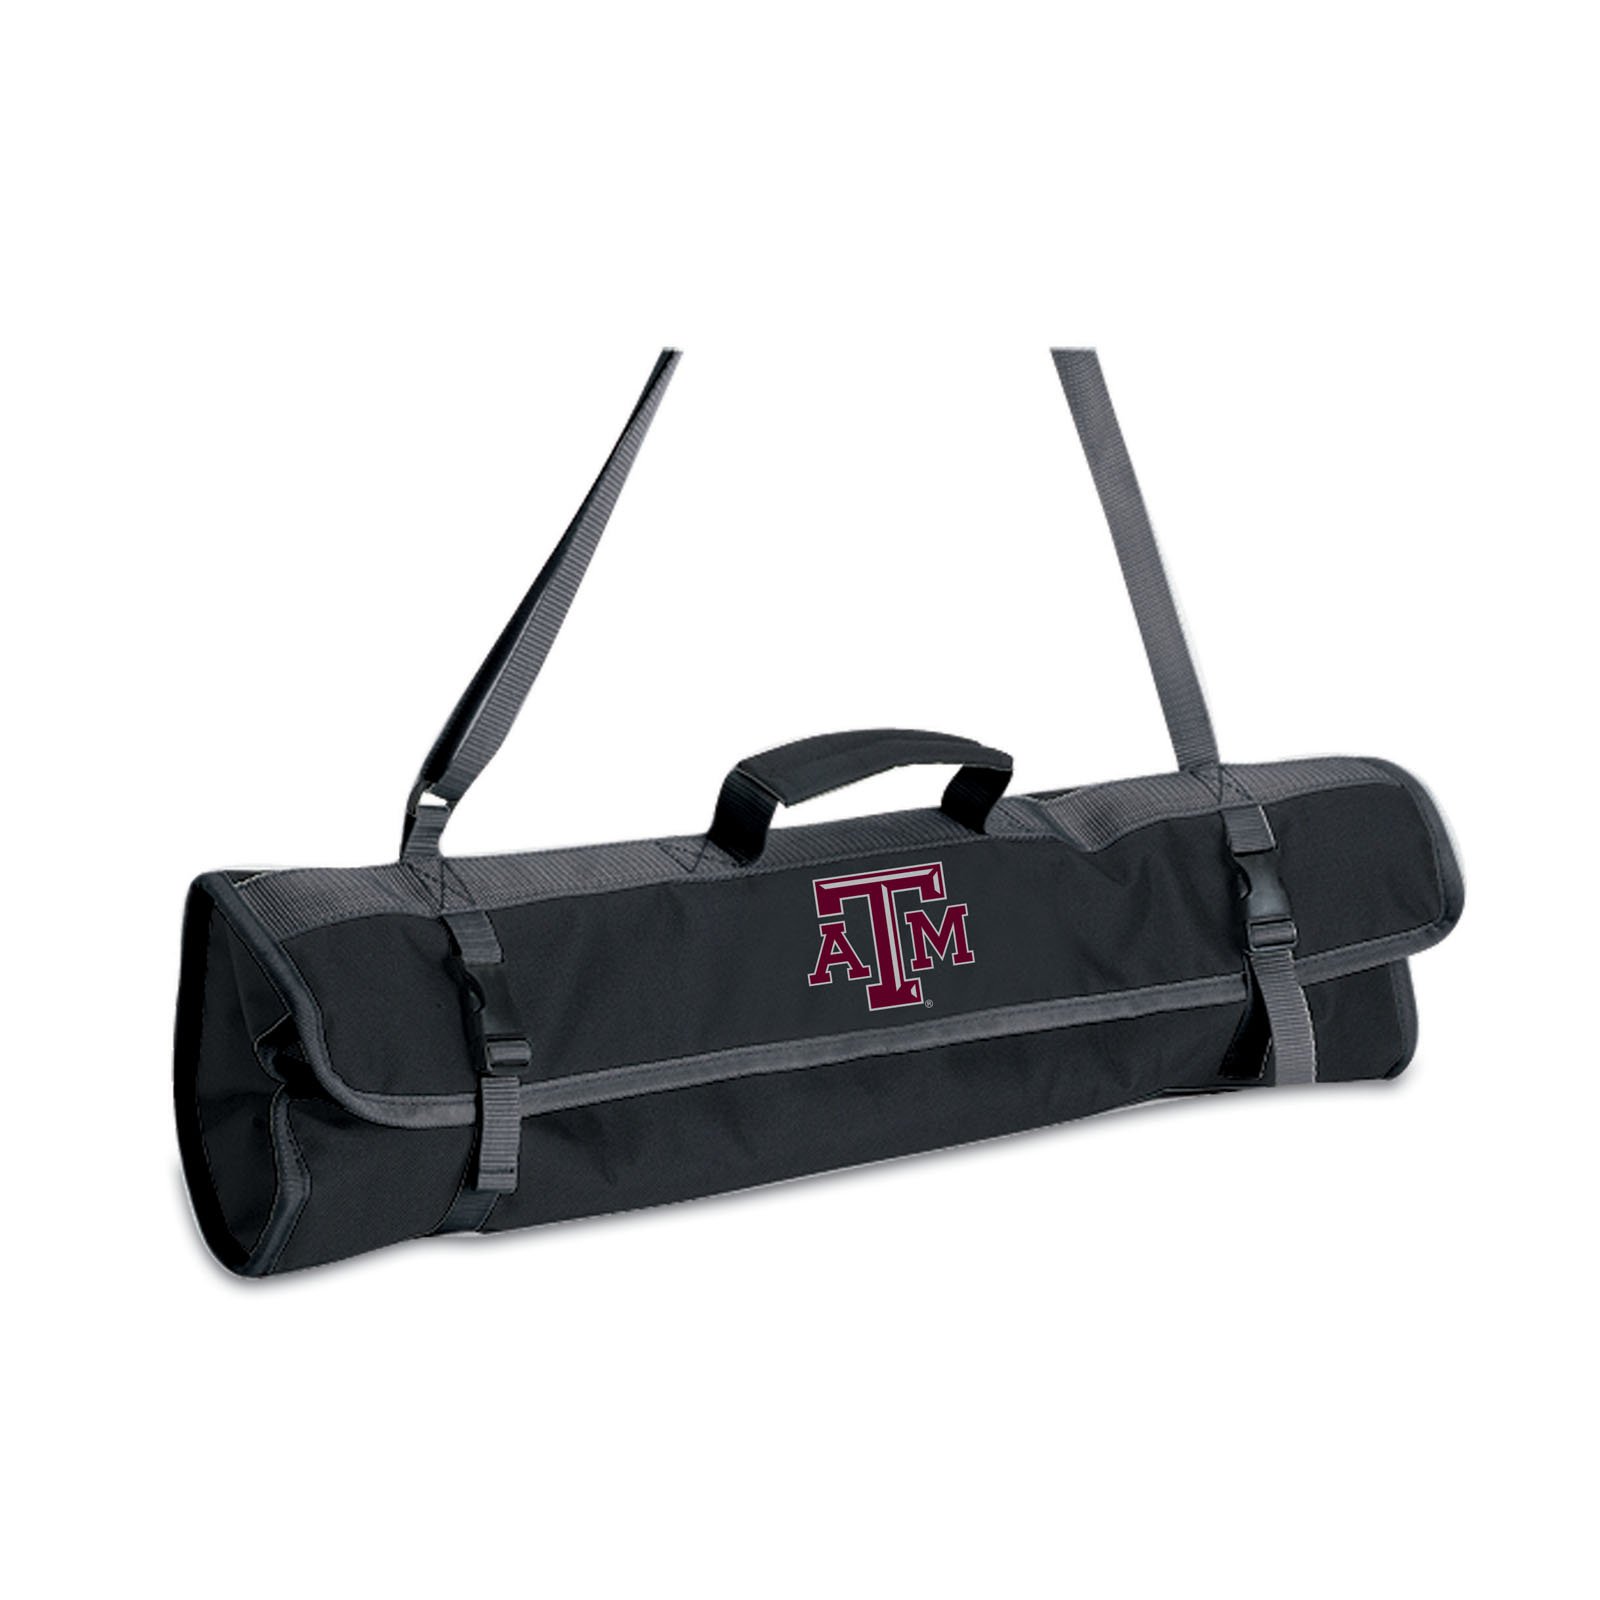 Picnic Time 3-Piece BBQ Tote With Printed Collegiate Football Team Logo - image 1 of 1